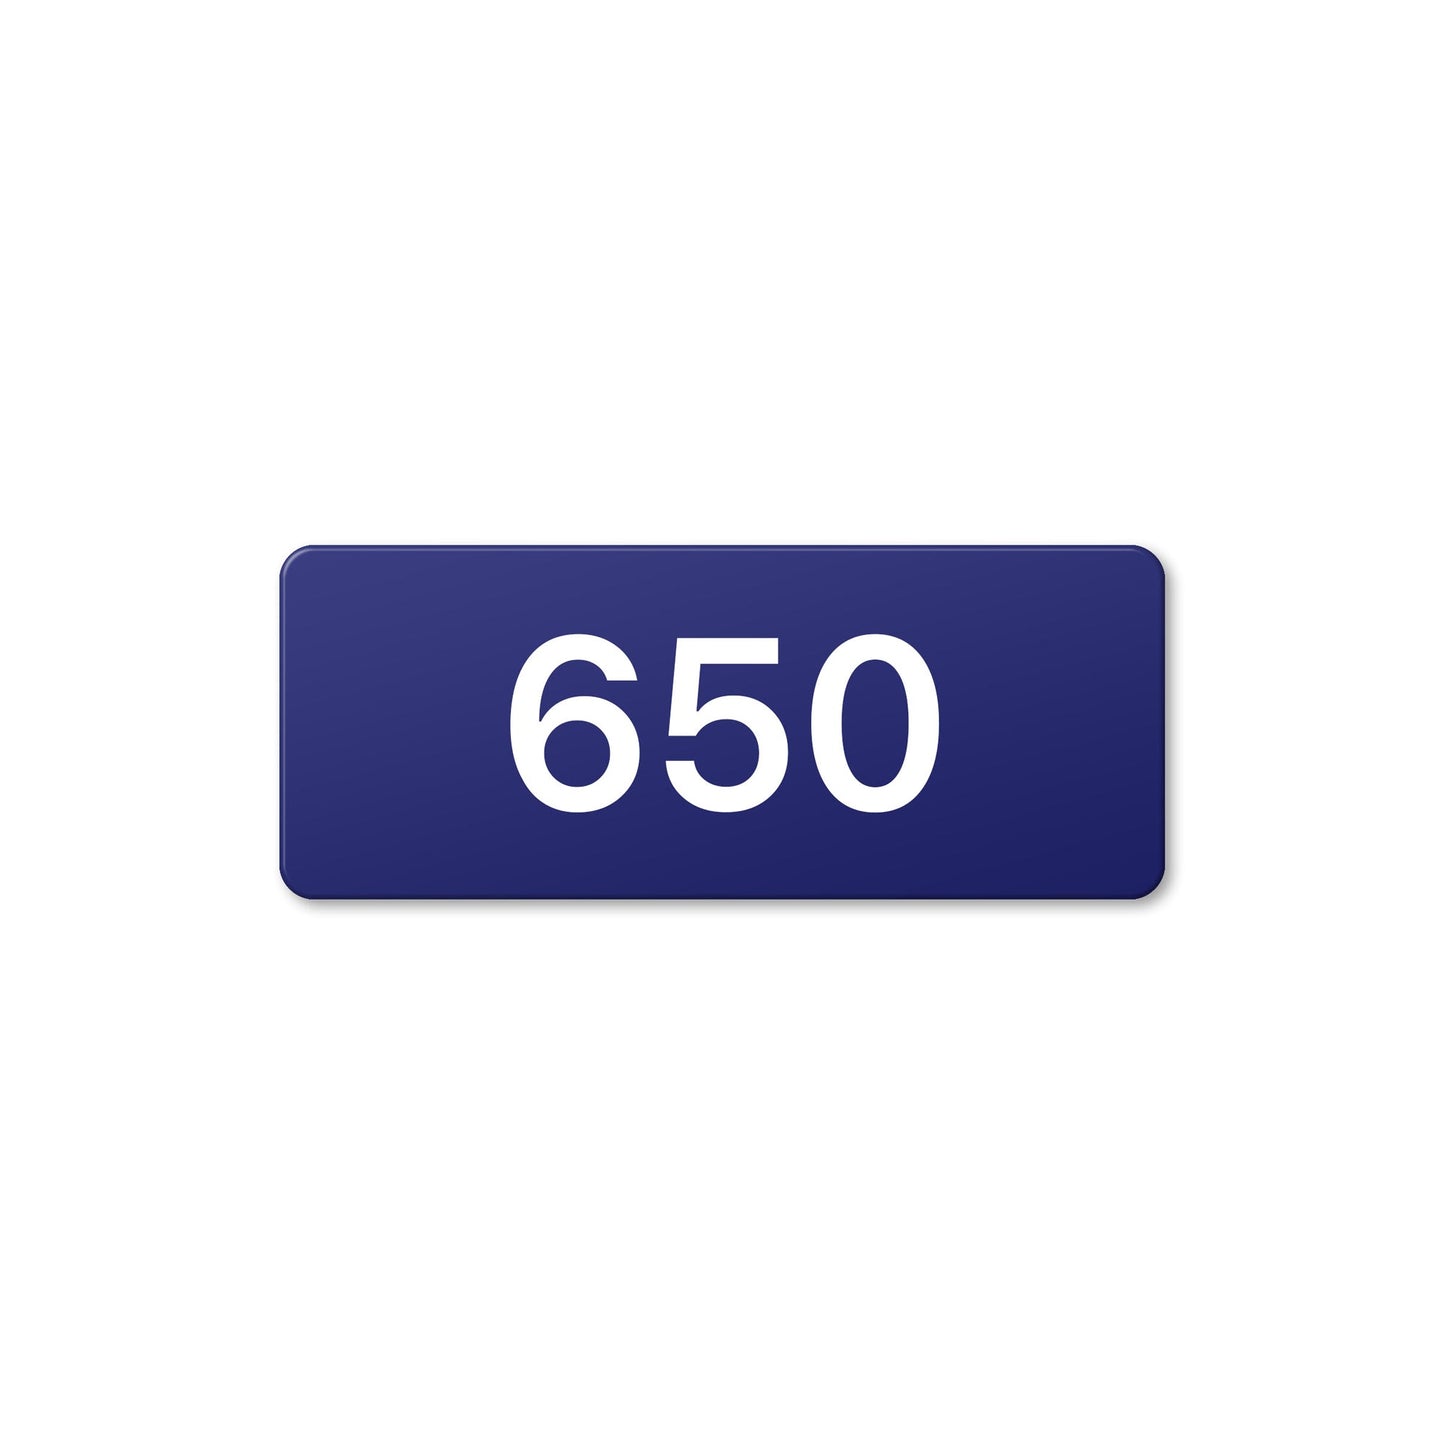 Numeral 650